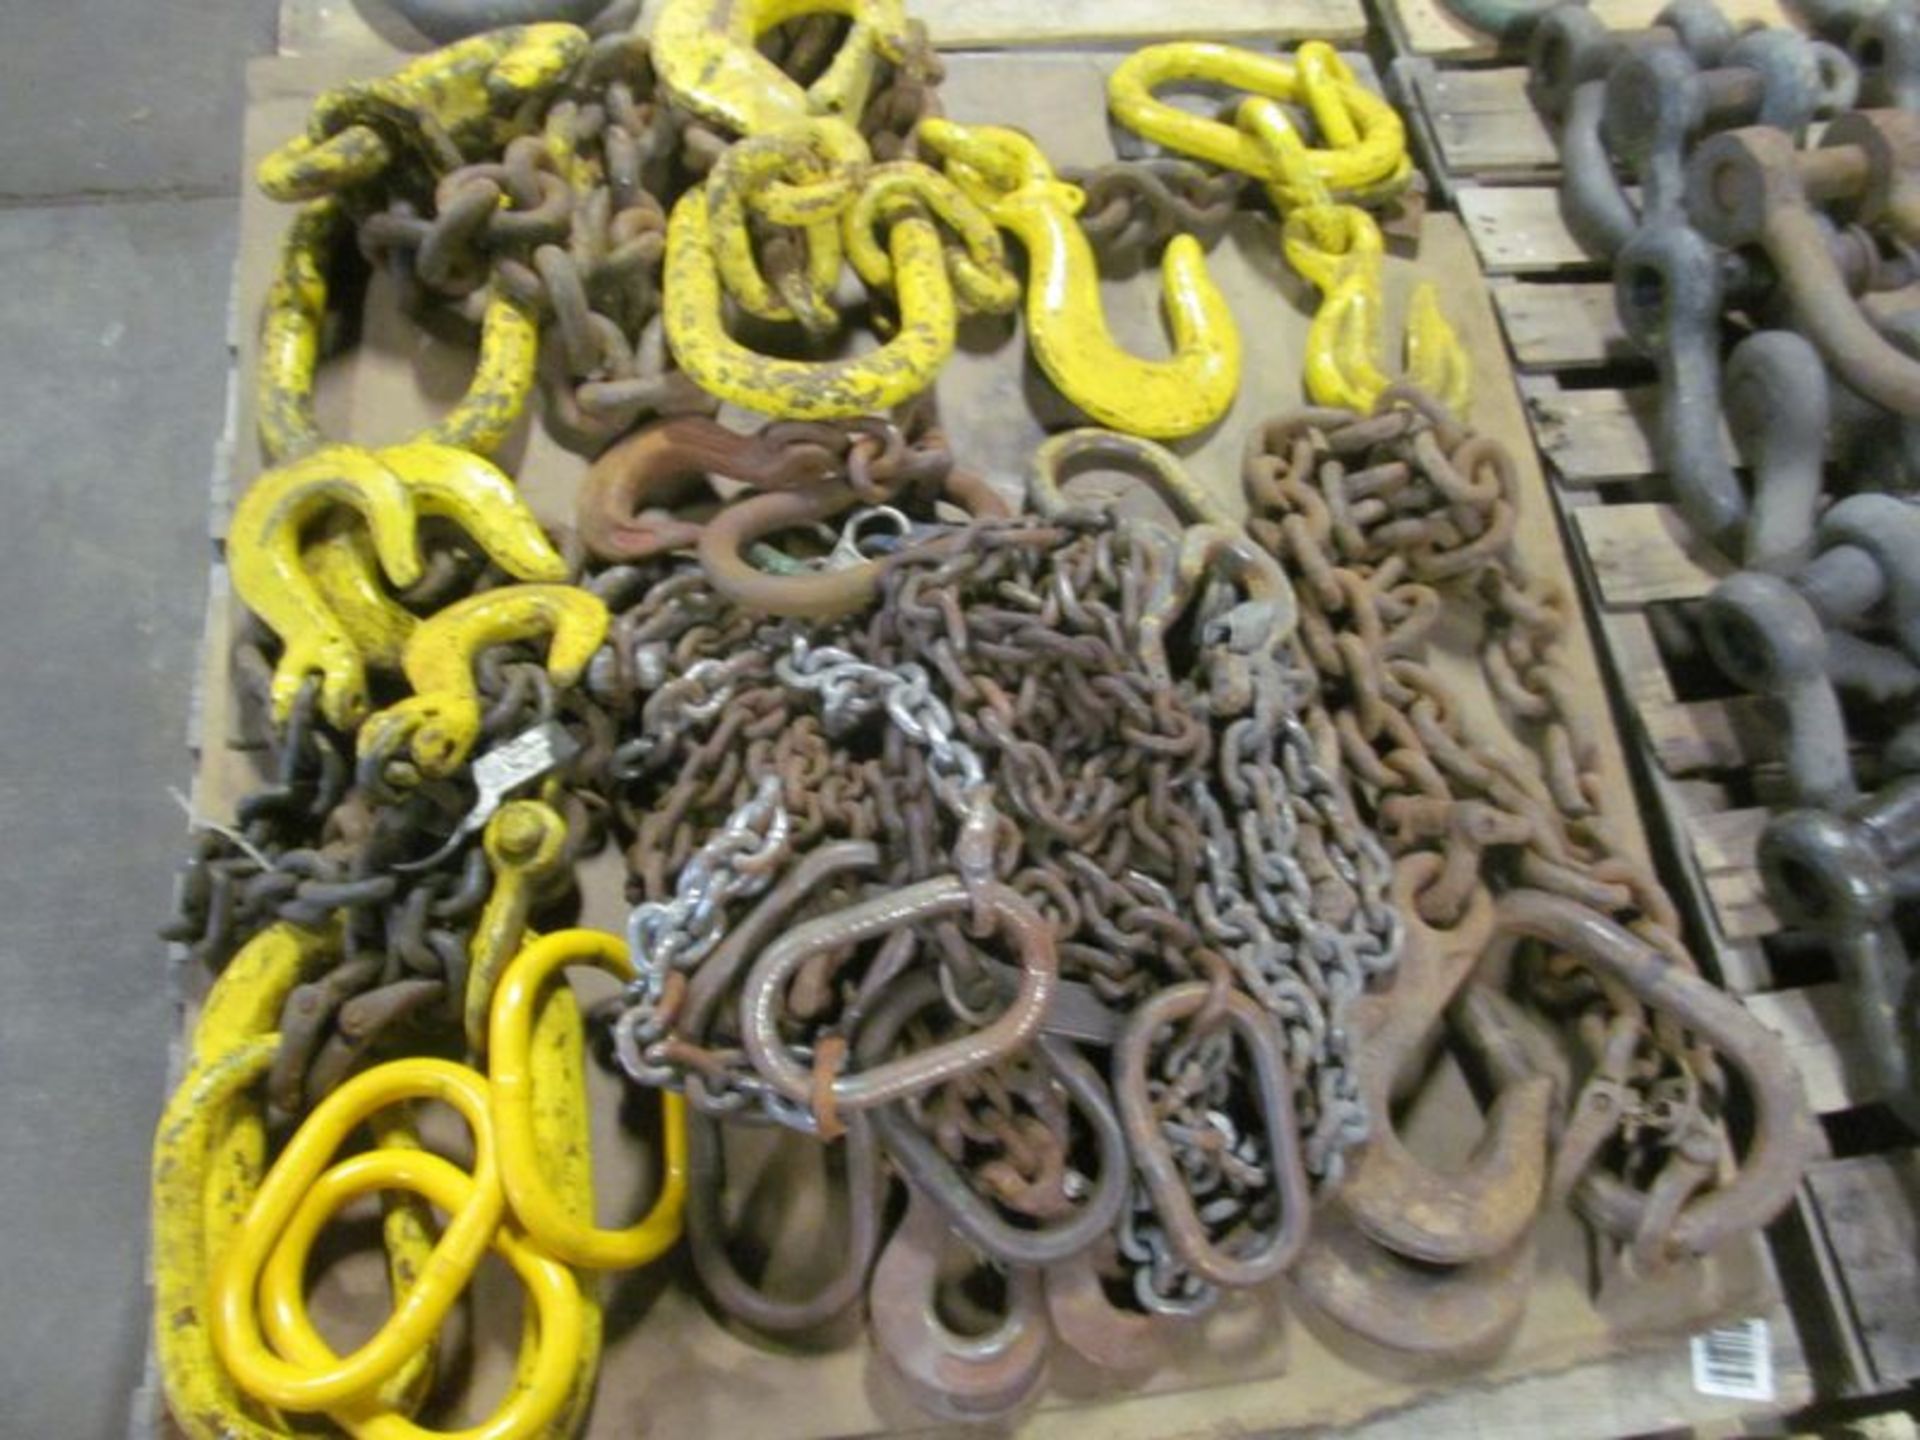 Lot ass't chains and chain spreaders